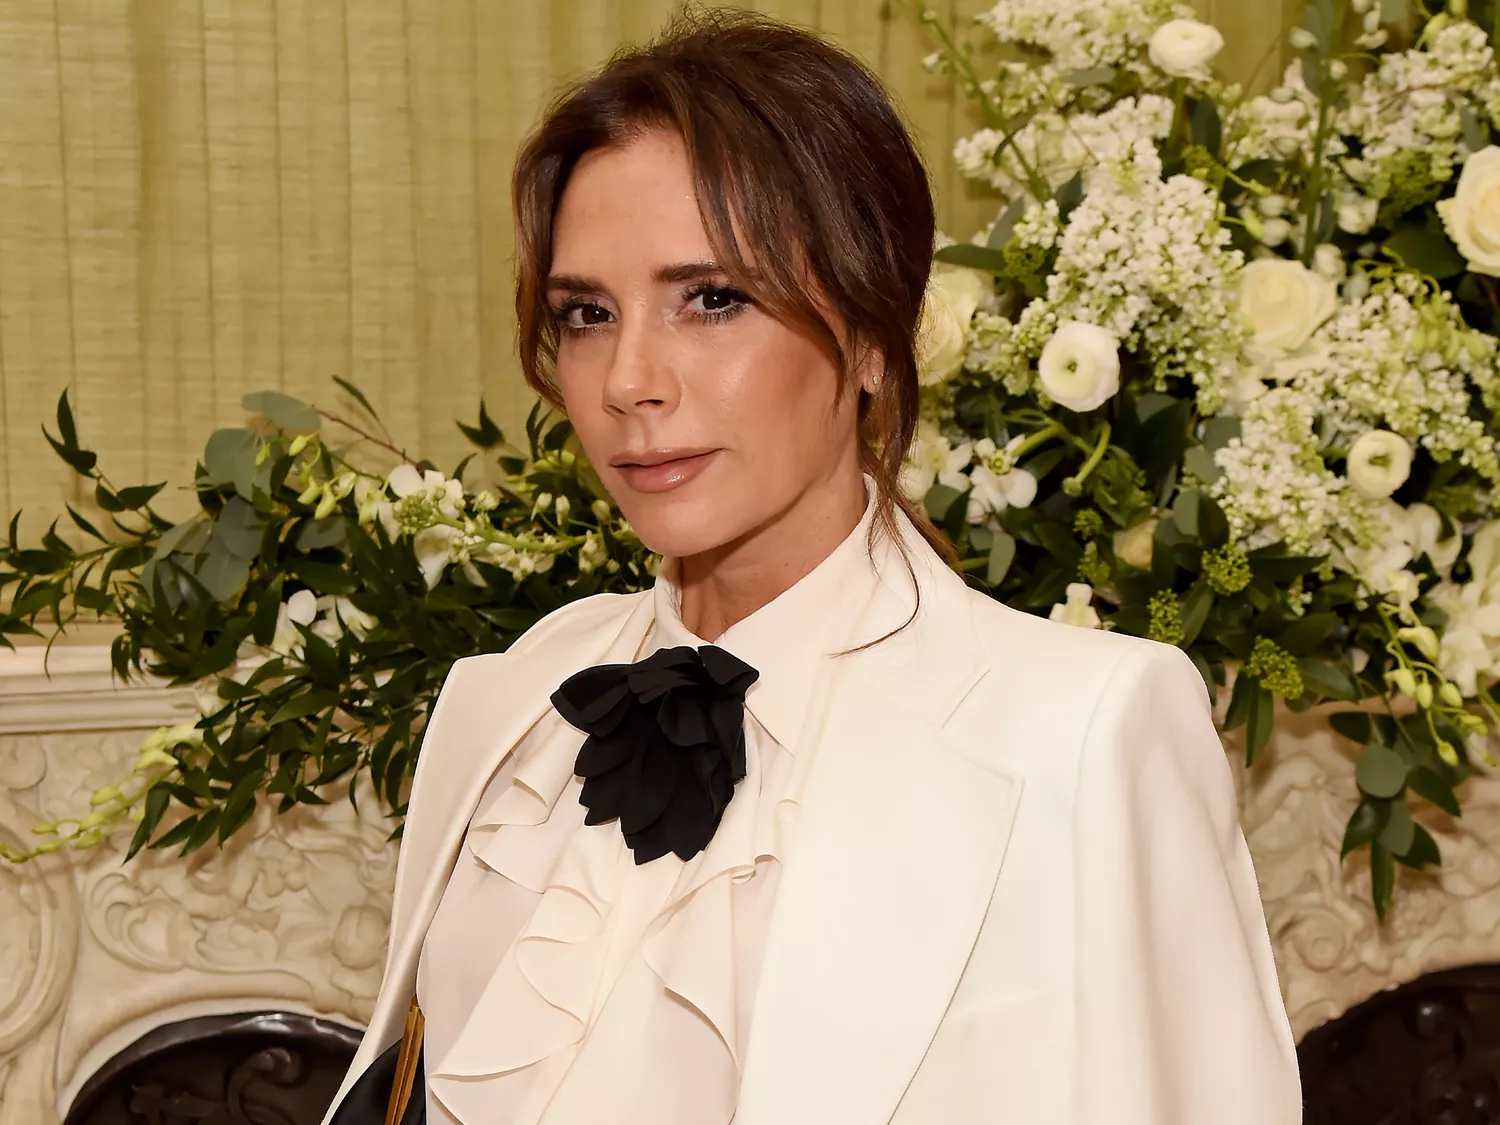 Victoria Beckham in a white suit